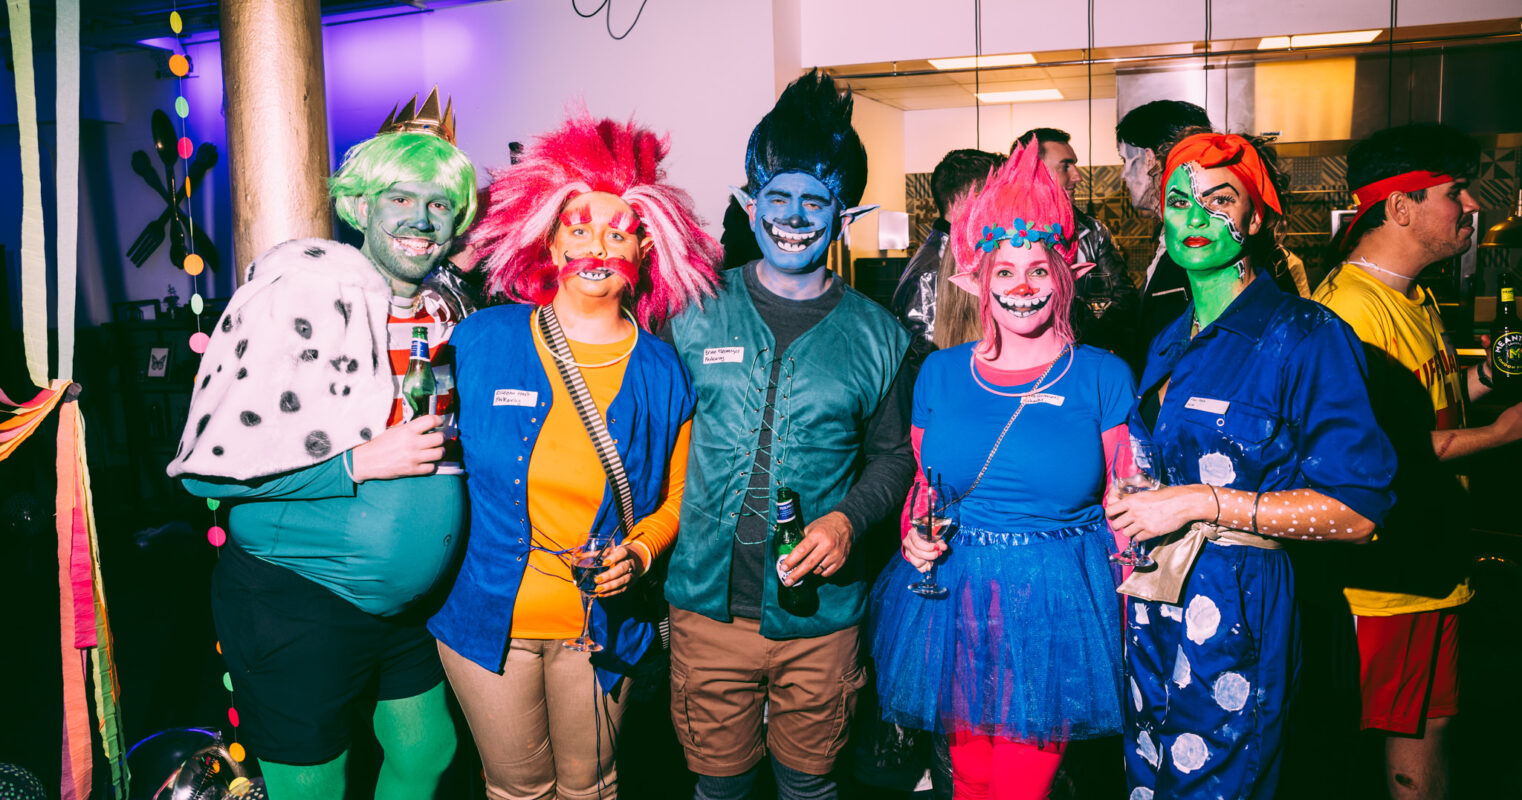 A group of people in colorful, whimsical costumes with face paint and props, enjoying a themed party.